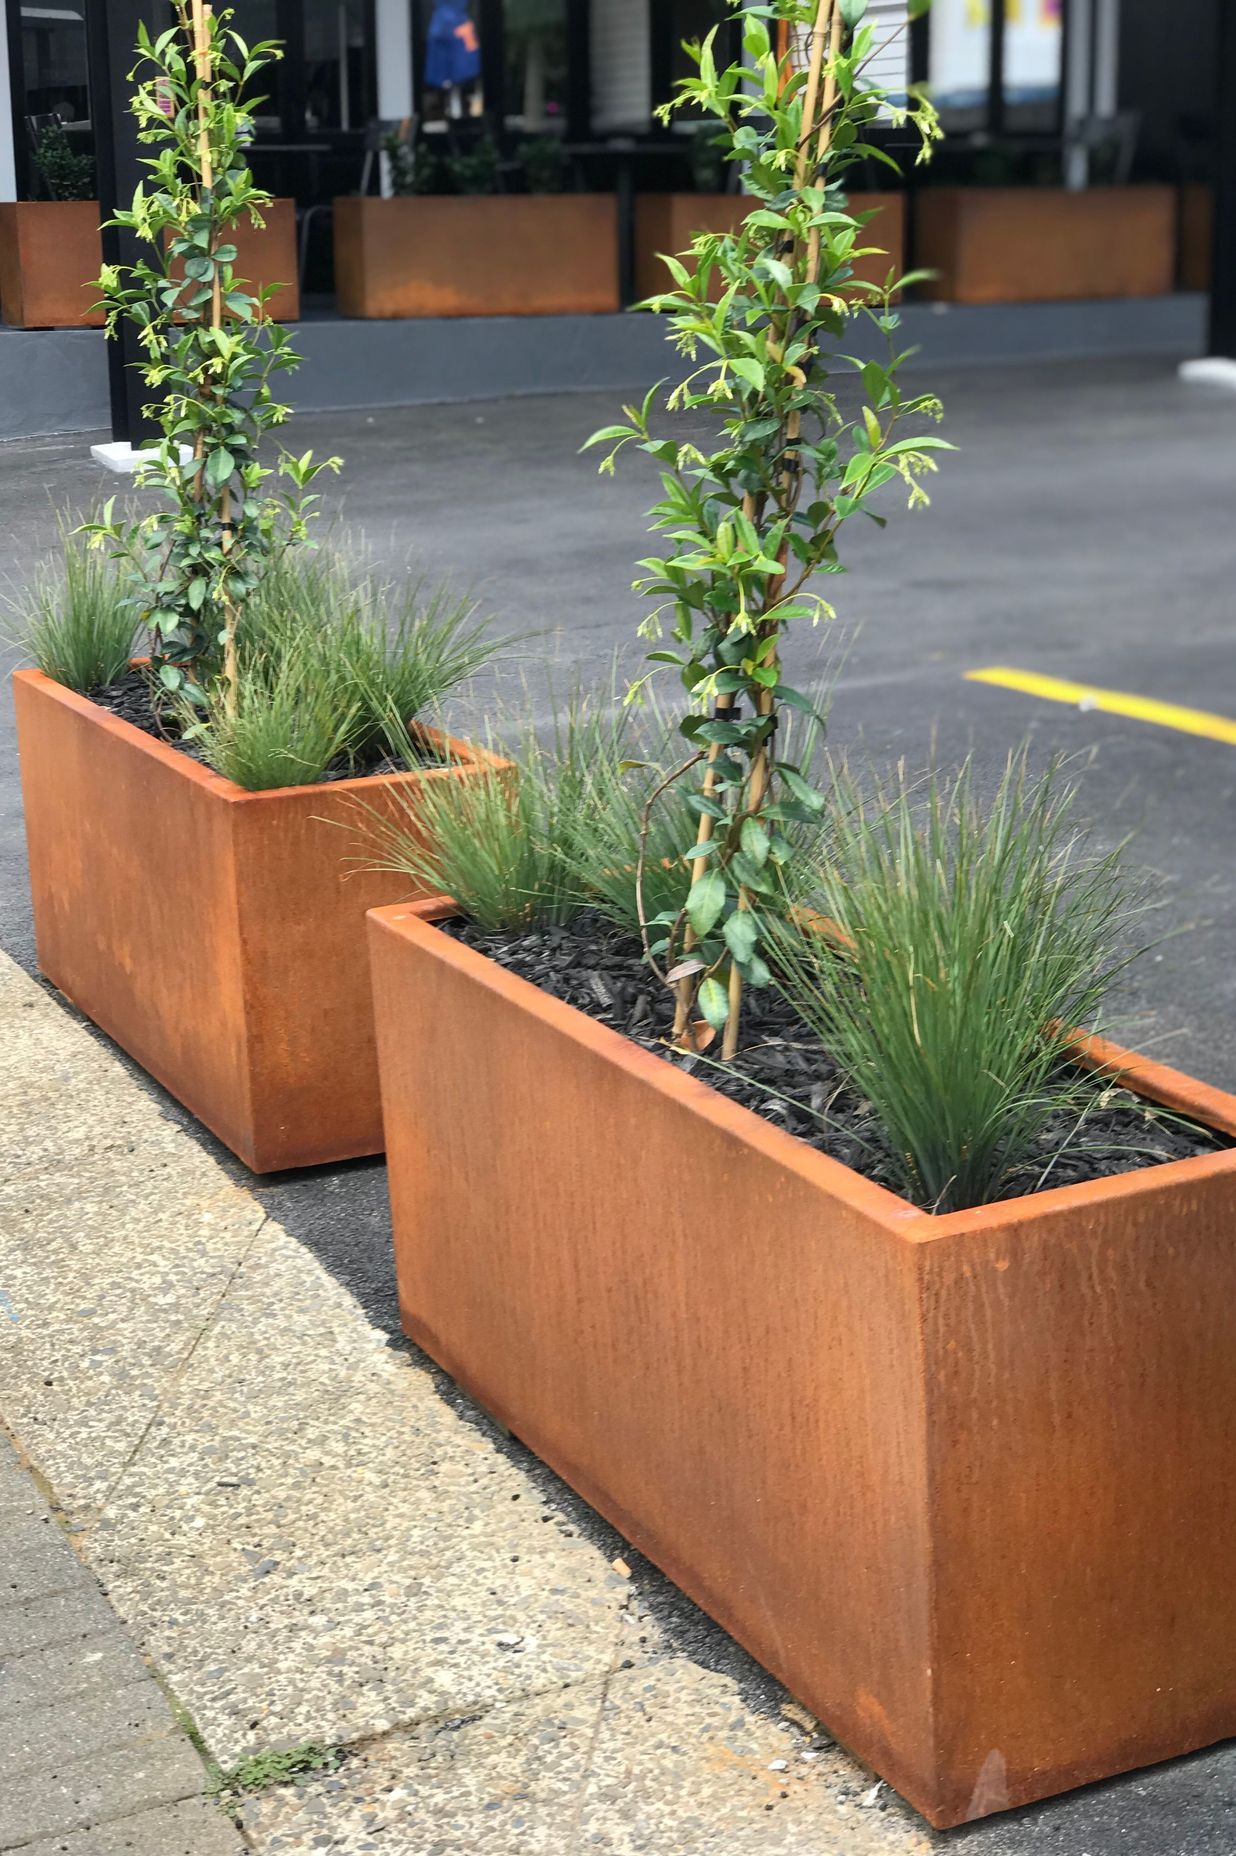 Solid and heavy, filled planters acting as a threshold barrier for the private car park.